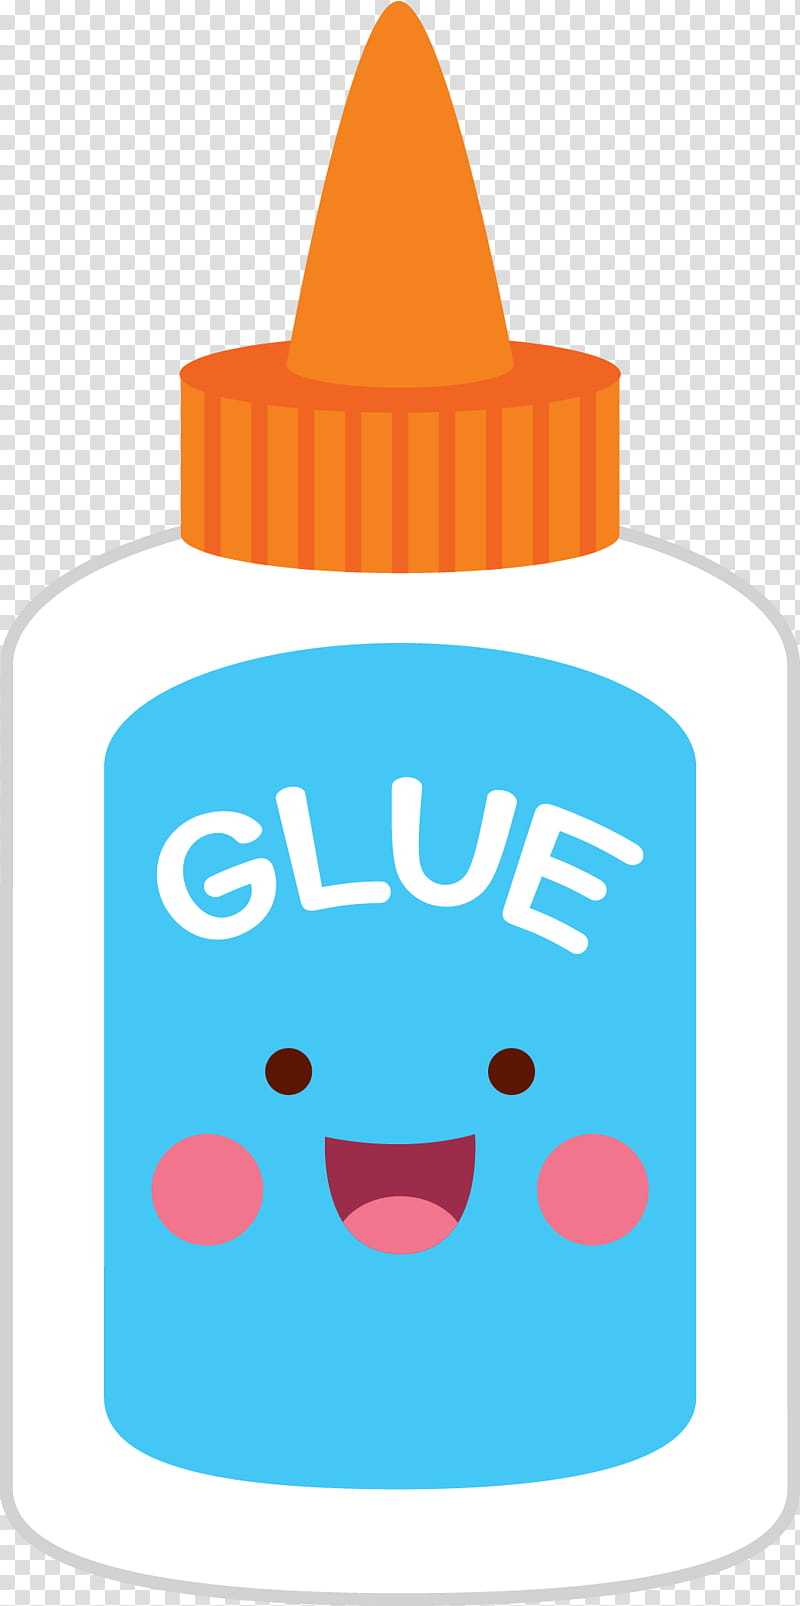 Free Clipart Of Glue Bottle  Free Images at Clkercom  vector clip art  online royalty free  public domain